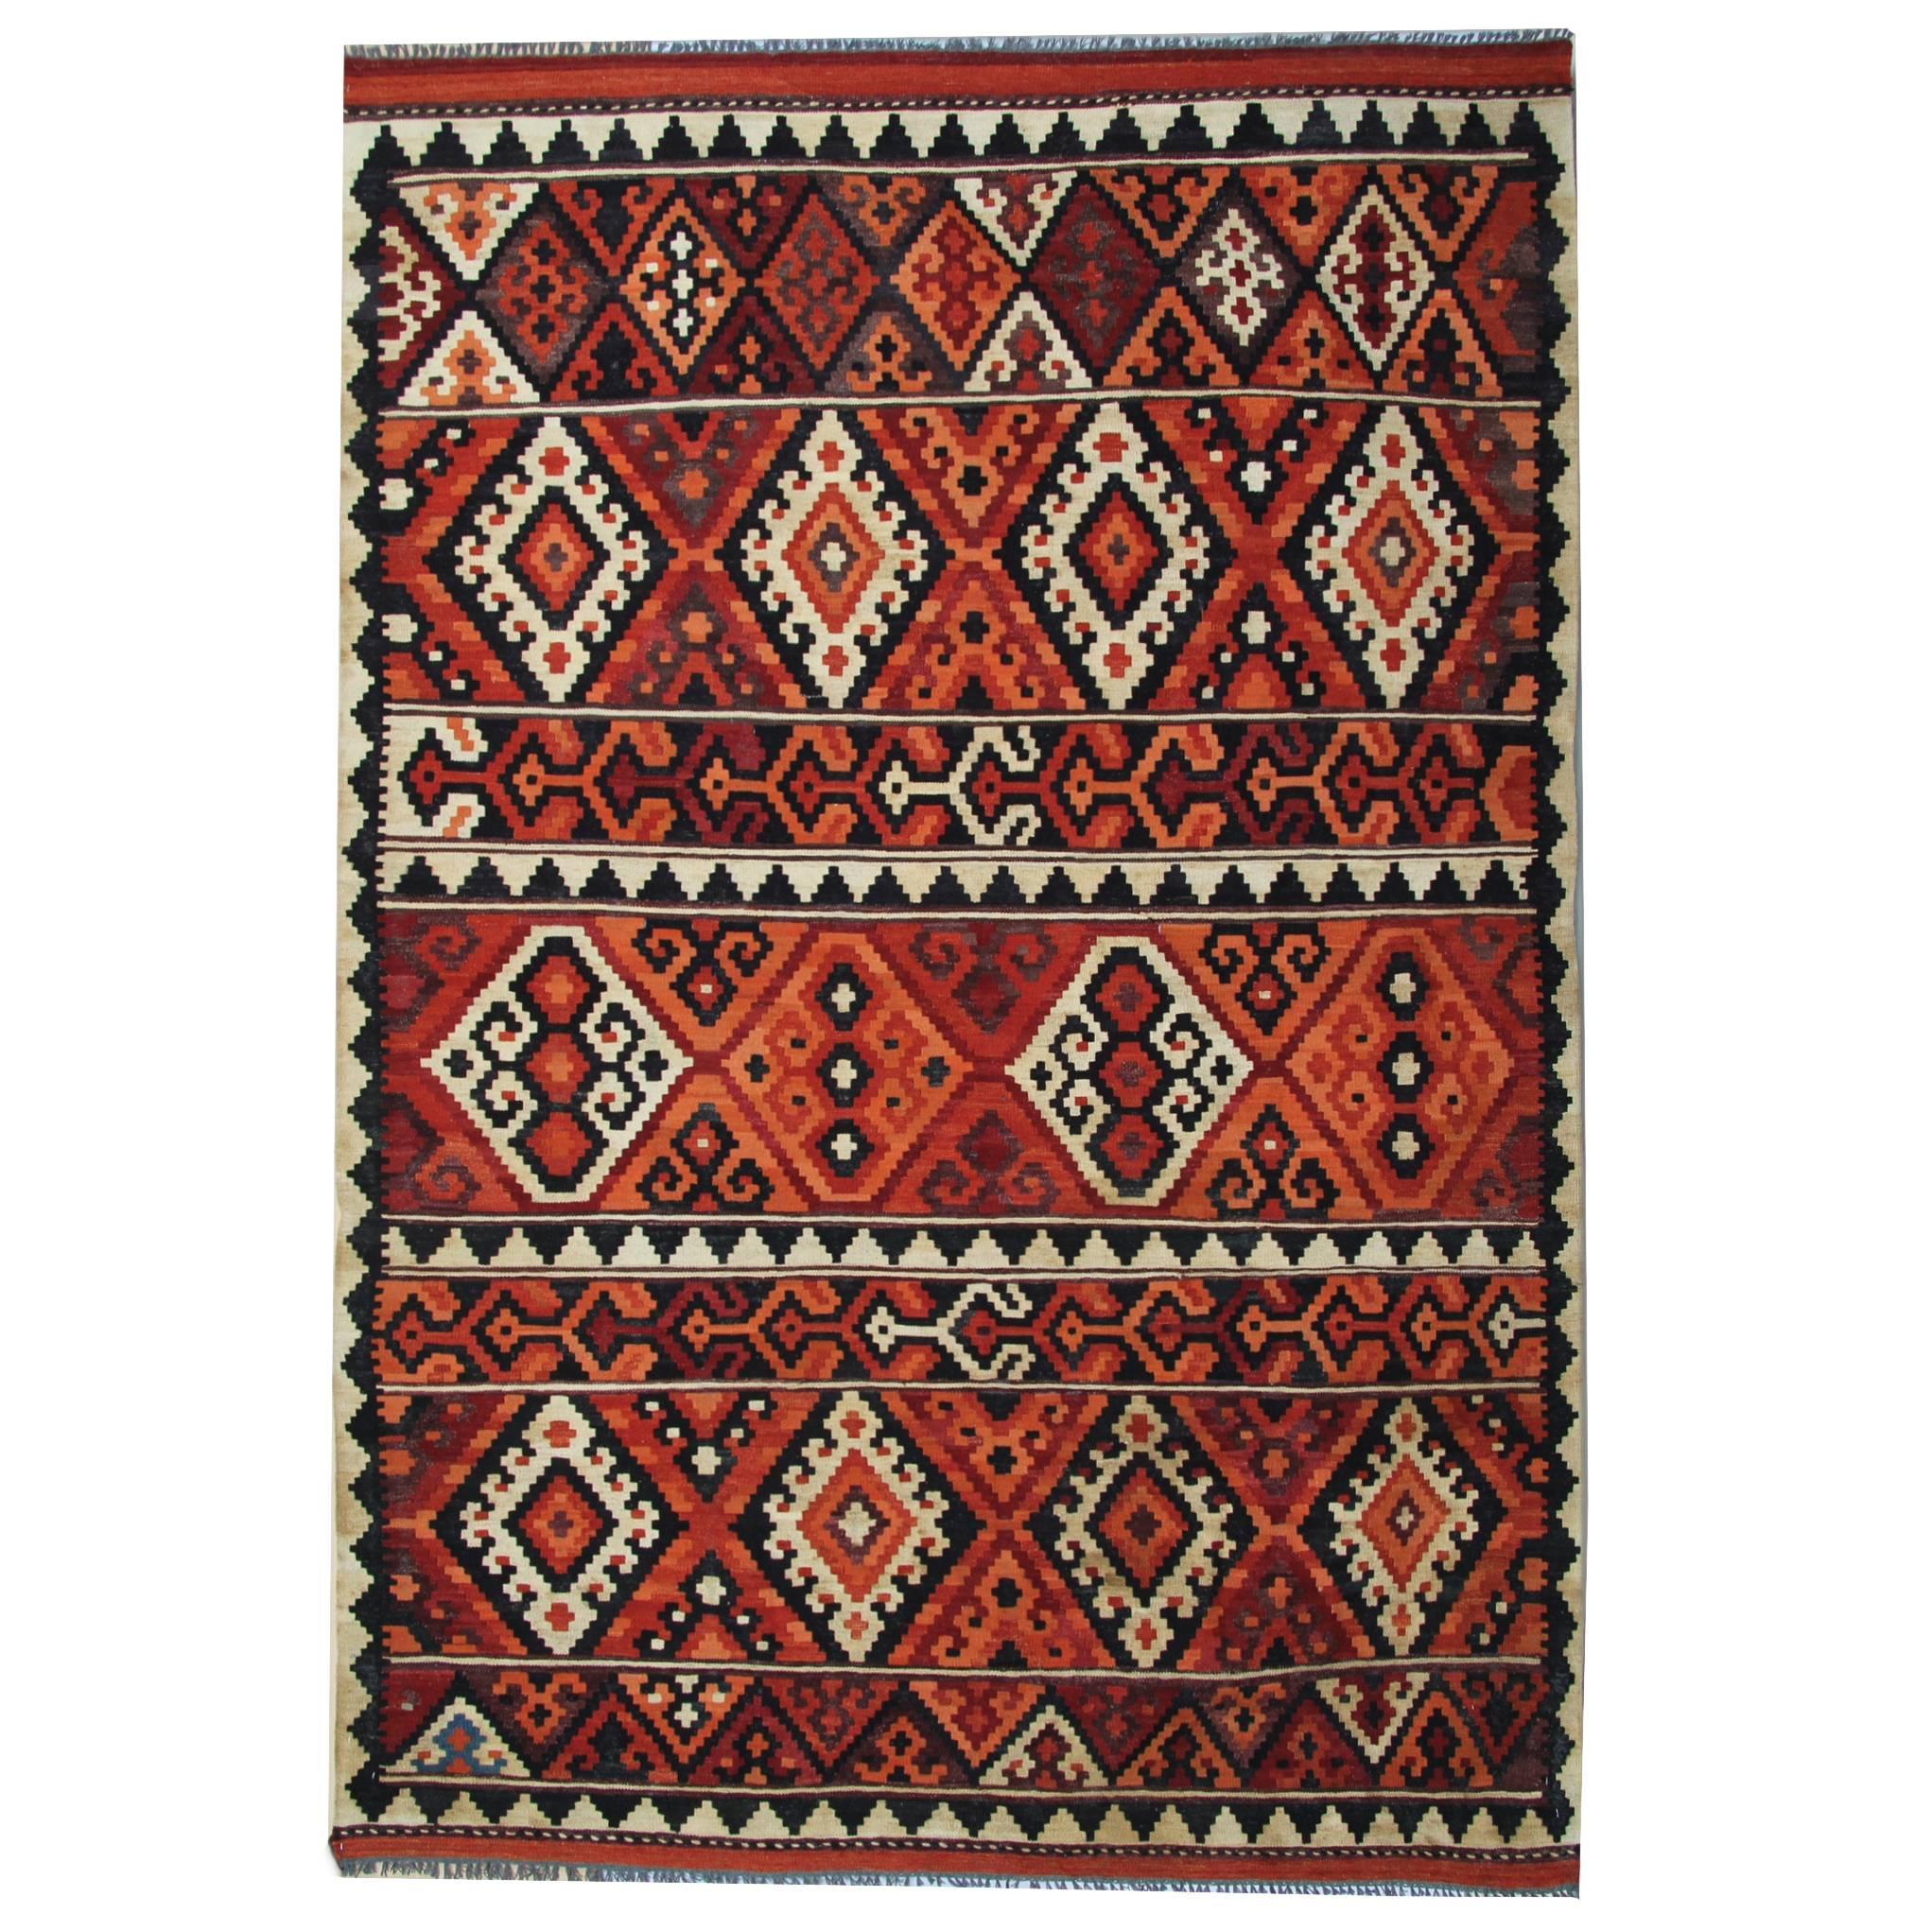 New Traditional Kllim Rugs from Afghanistan, Geometrical Persian Rugs Designs 